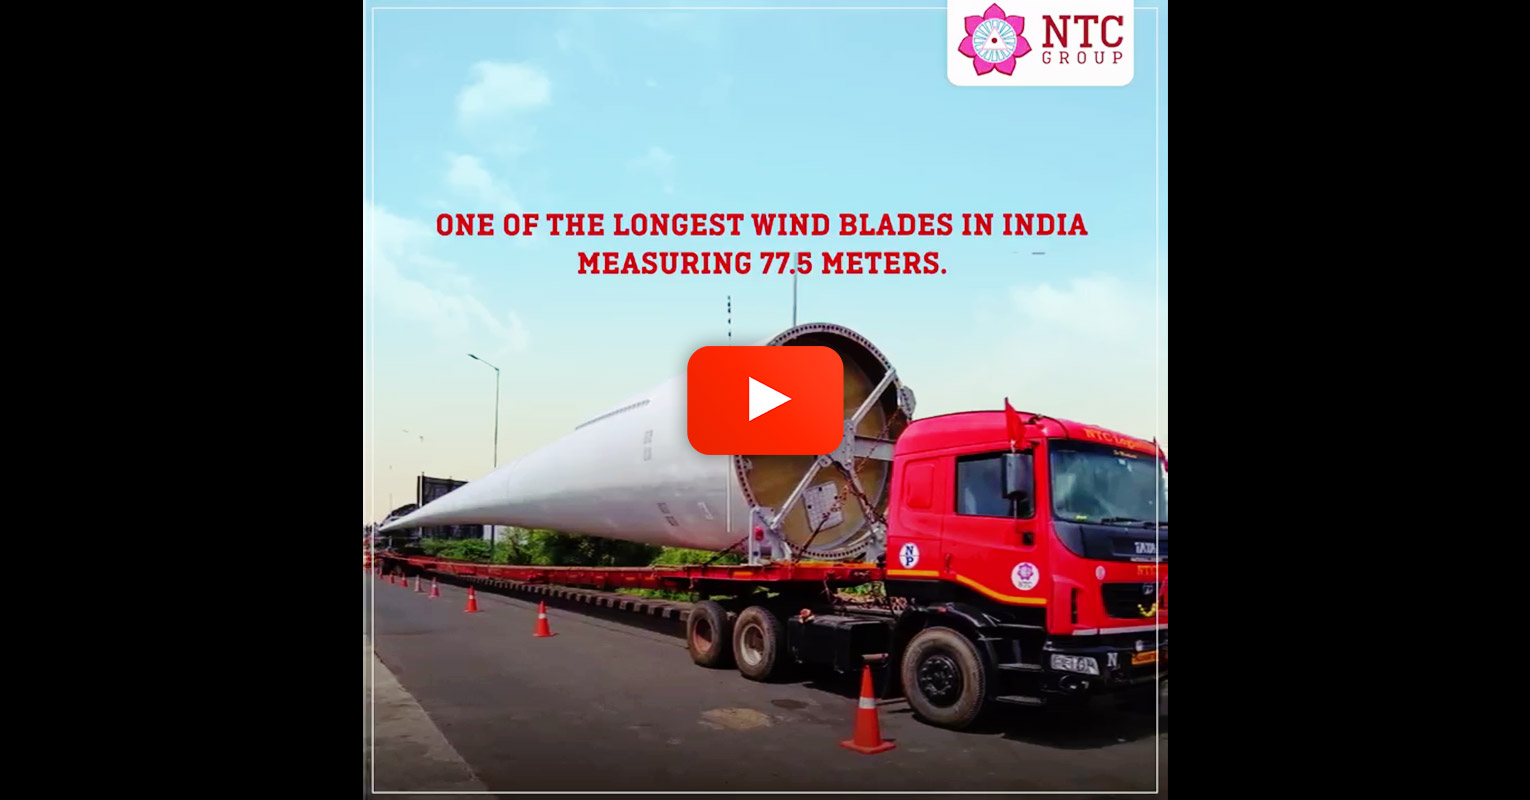 Video - NTC Logistics Carried One of the Longest Wind Turbine Blades in India 600 km from Door Chennai to VOC Port in Tuticorin